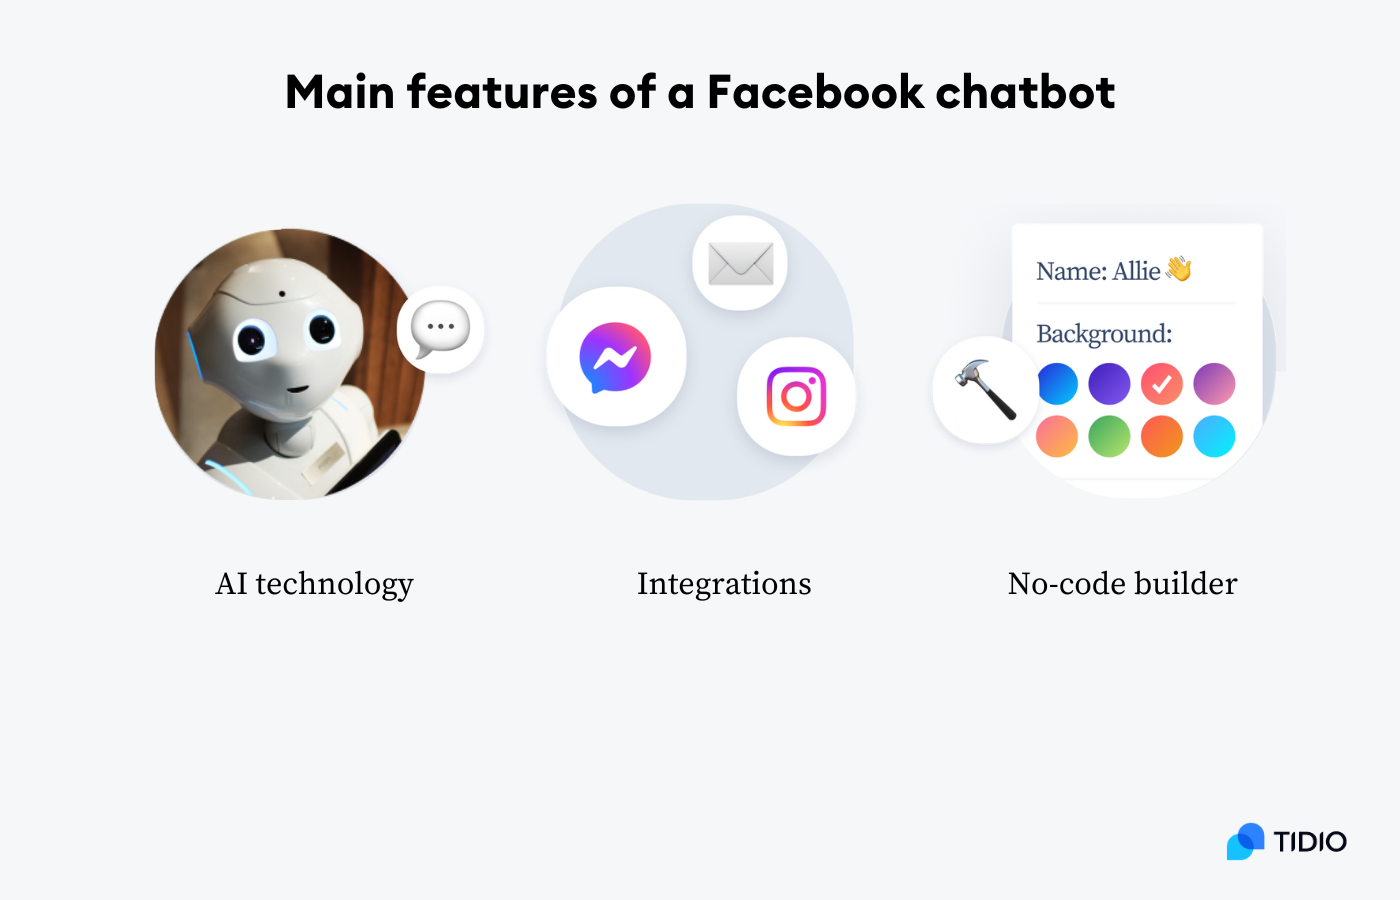 main features of a facebook chatot on image